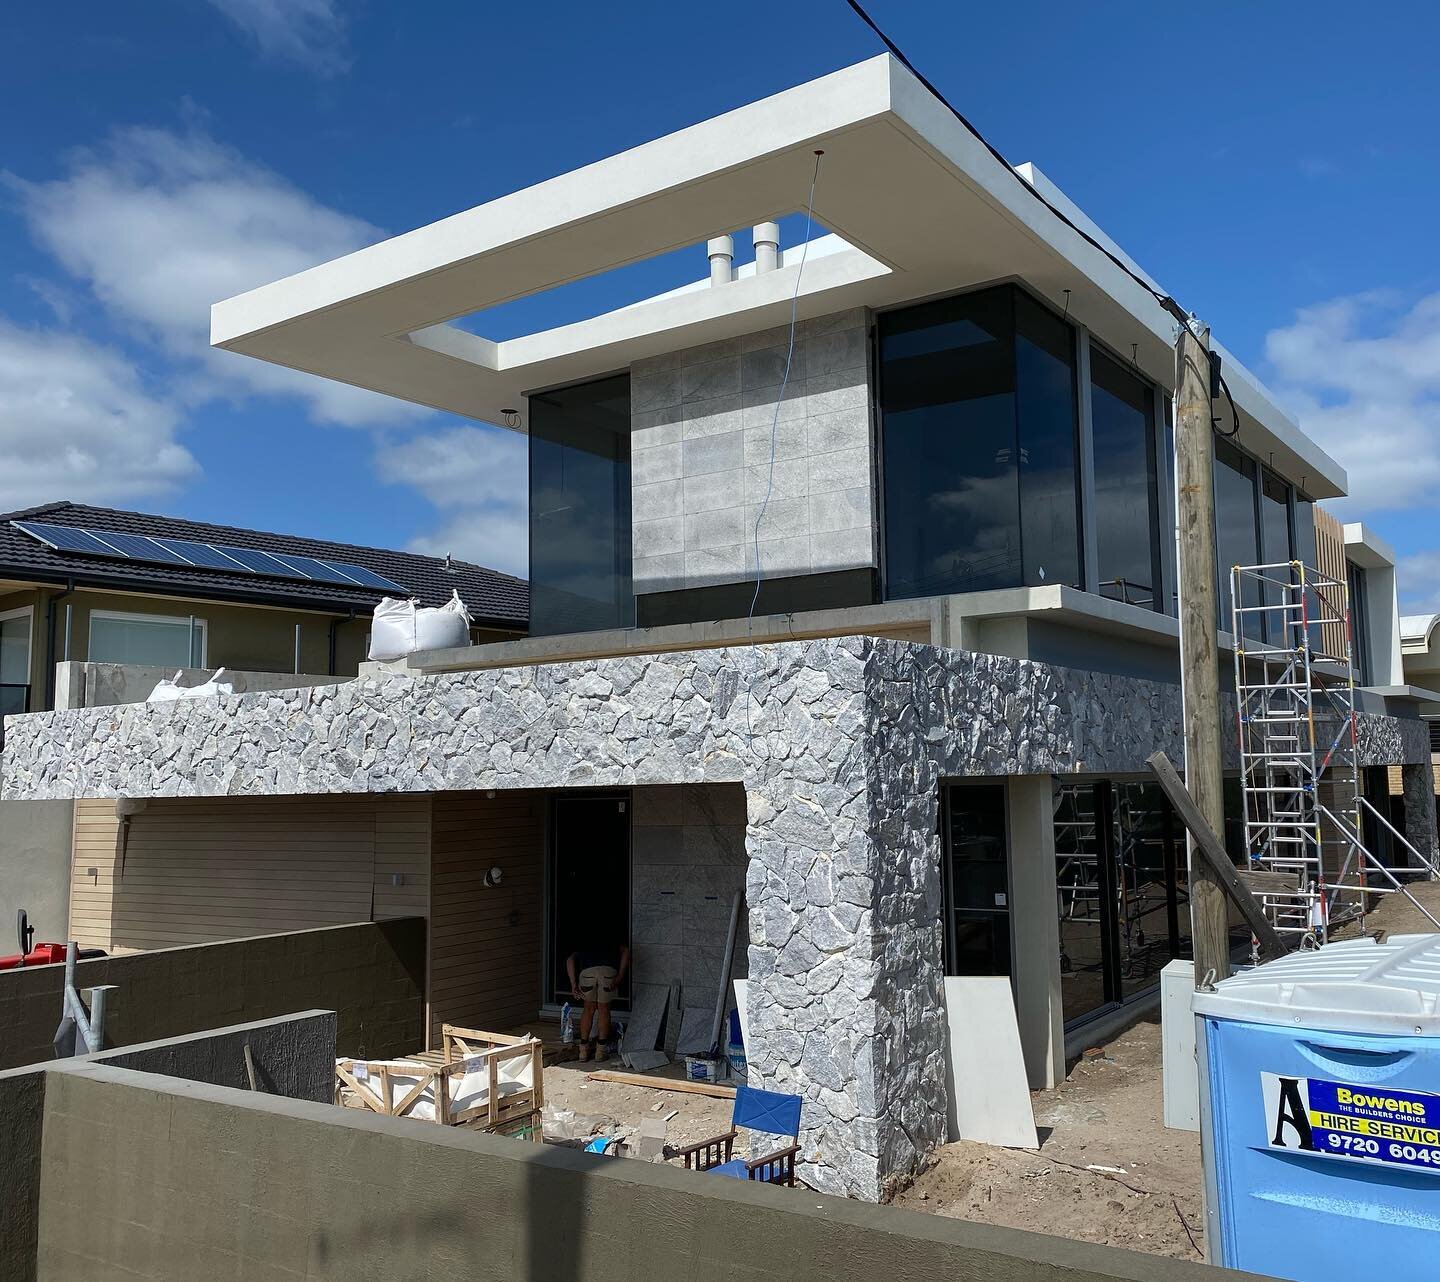 4,500 pieces, 750 hours later and we are absolutely stoked with how good this free form wall cladding looks. 
Can&rsquo;t wait to see the glass installed above it for the infinity pool edge.
Landscaping to come soon

Builder @larsenhomesptyltd 
Stone